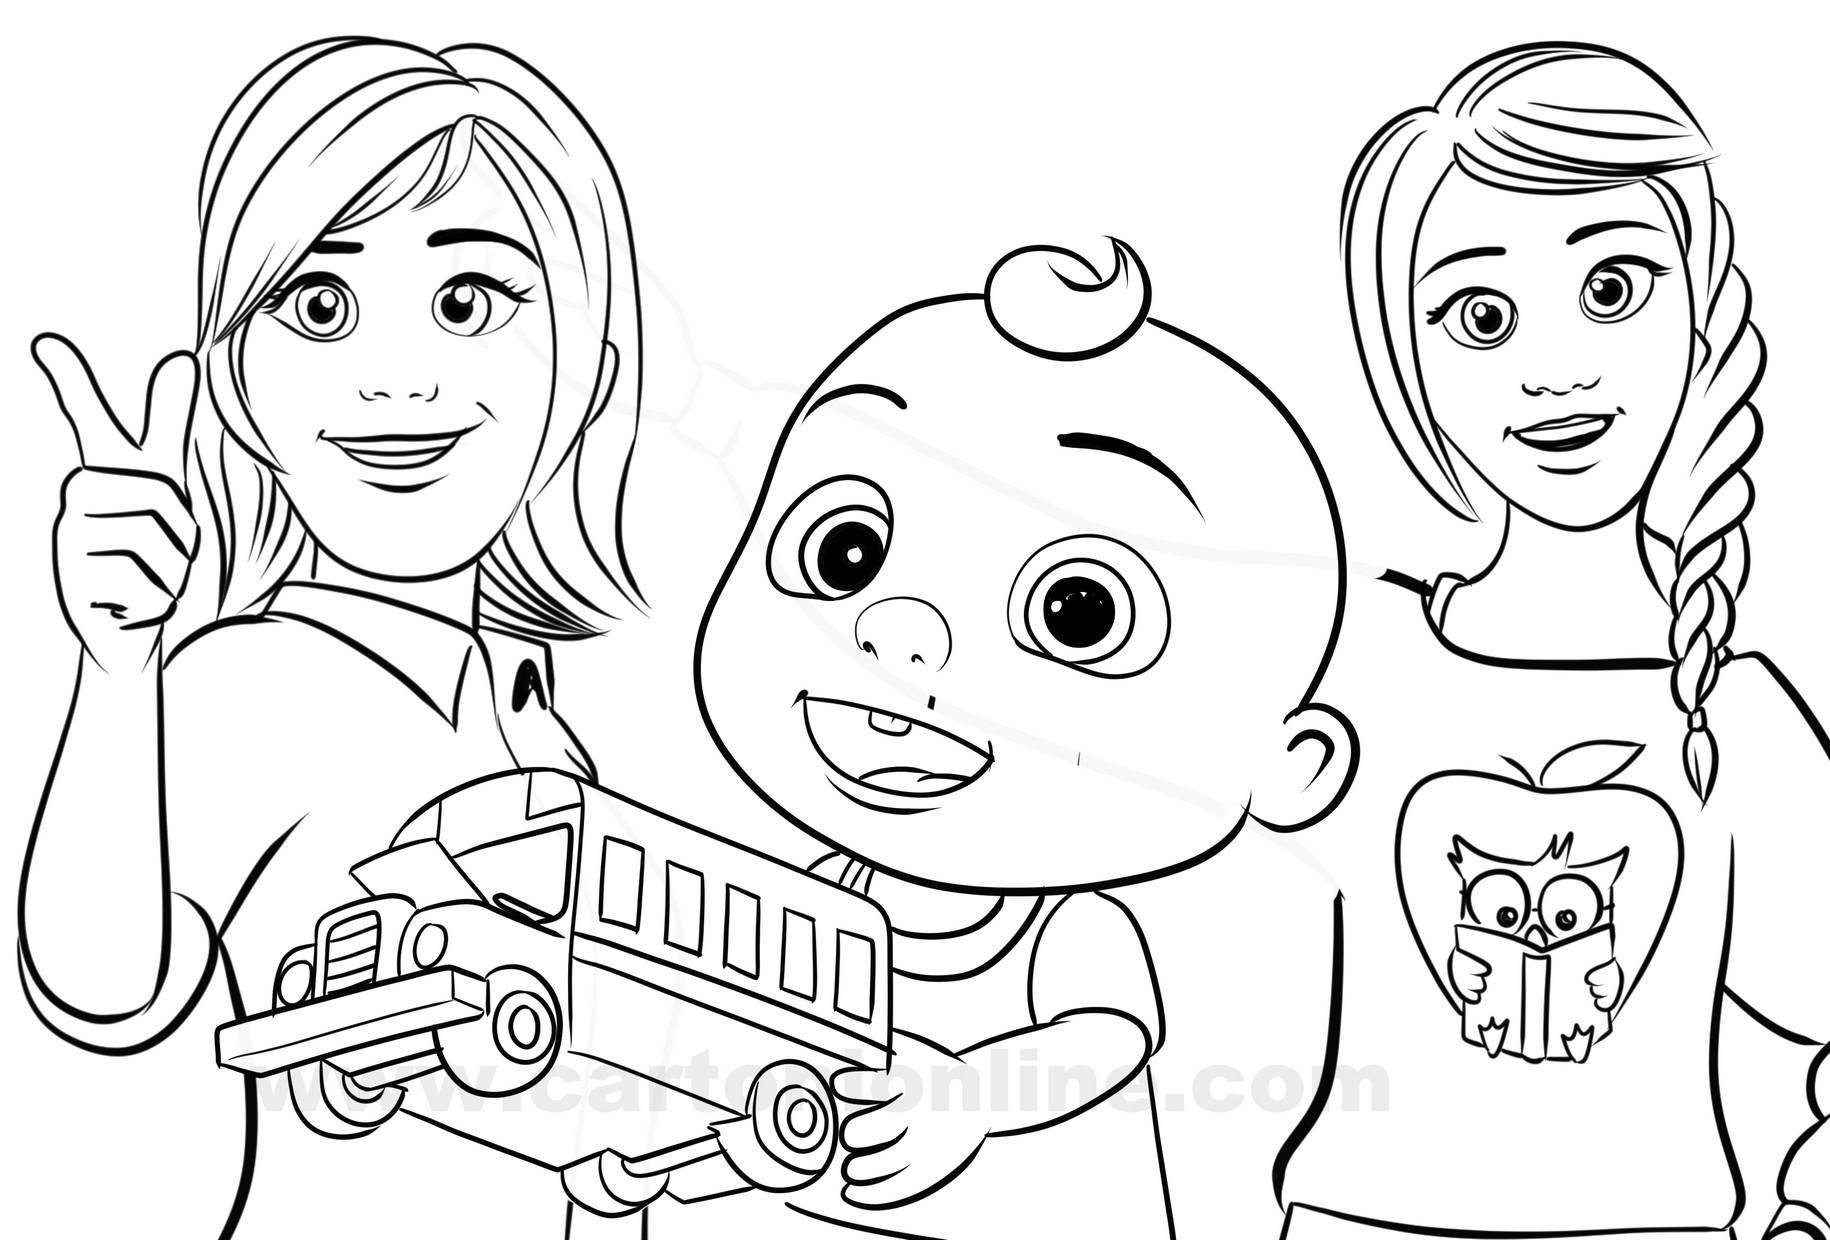 Miss Johnson, J.J., Ms.Appleberry from Cocomelon coloring page to print and coloring